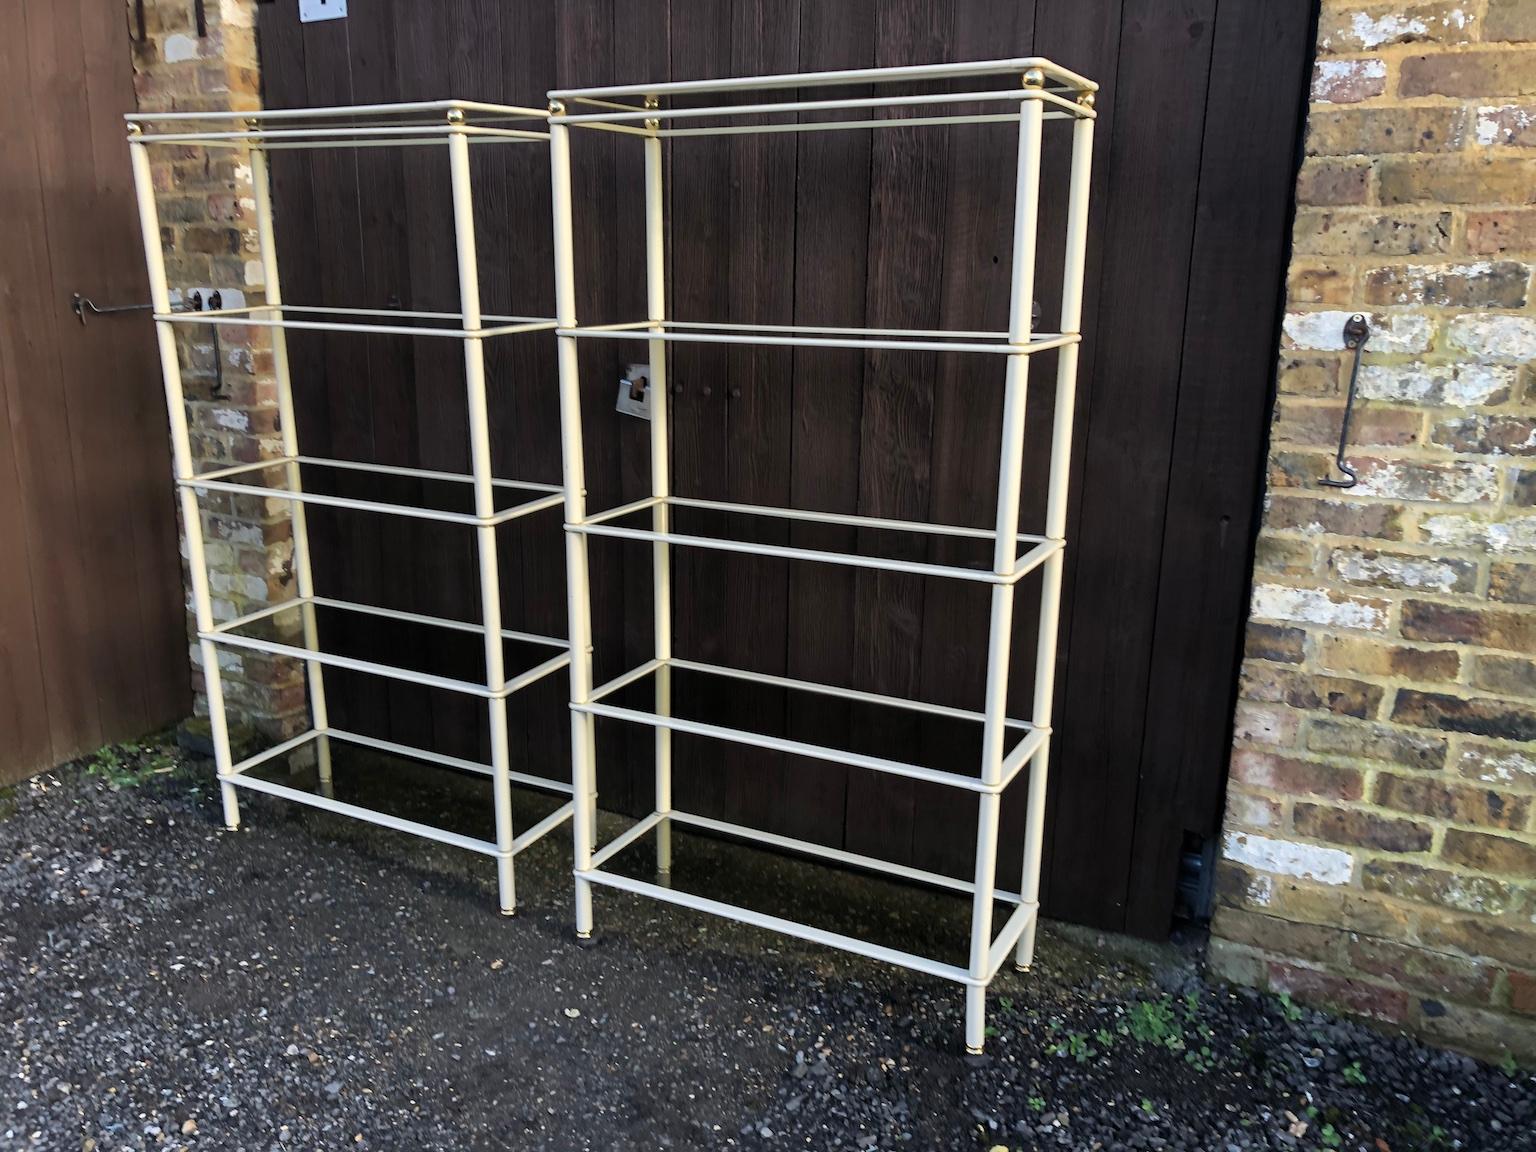 Midcentury Cream and Gold Metal Shelving Units, Italian, 1980s For Sale 1